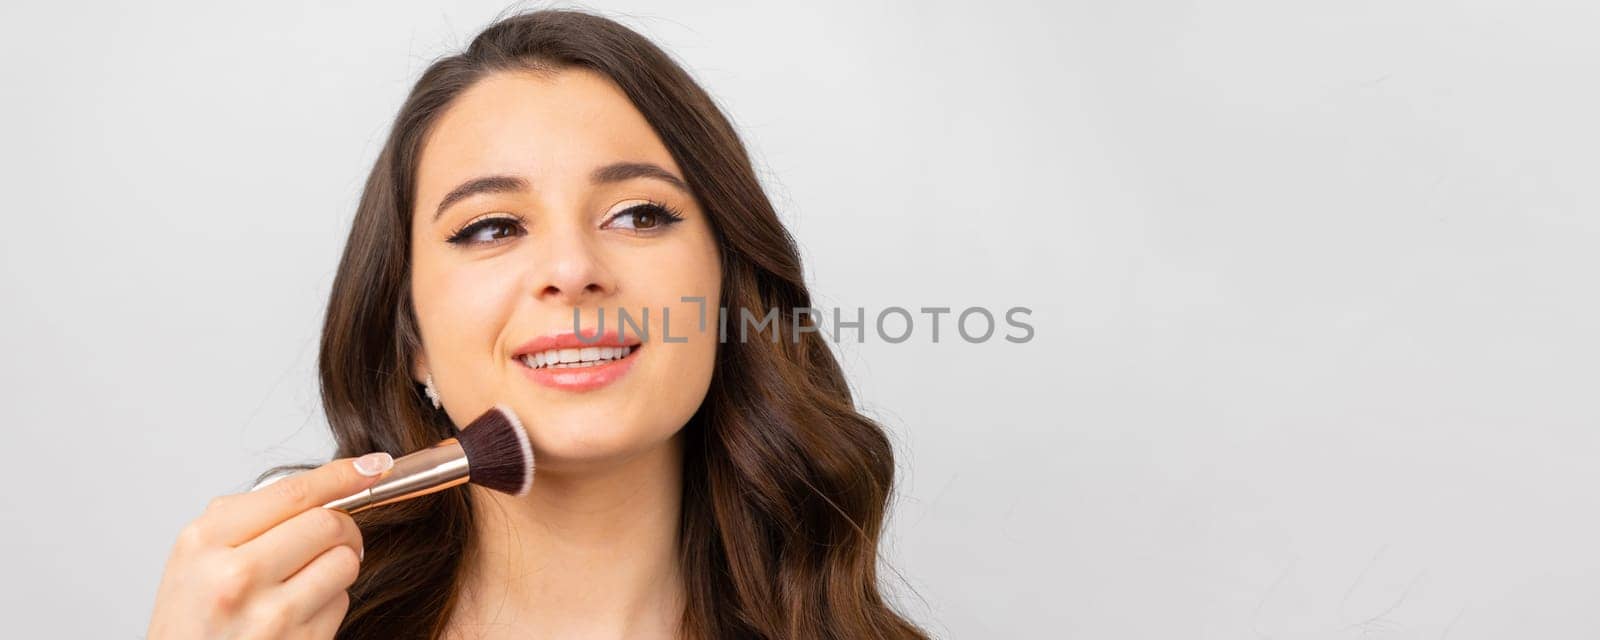 Young woman with perfect skin holding makeup brush near face on the grey background by vladimka